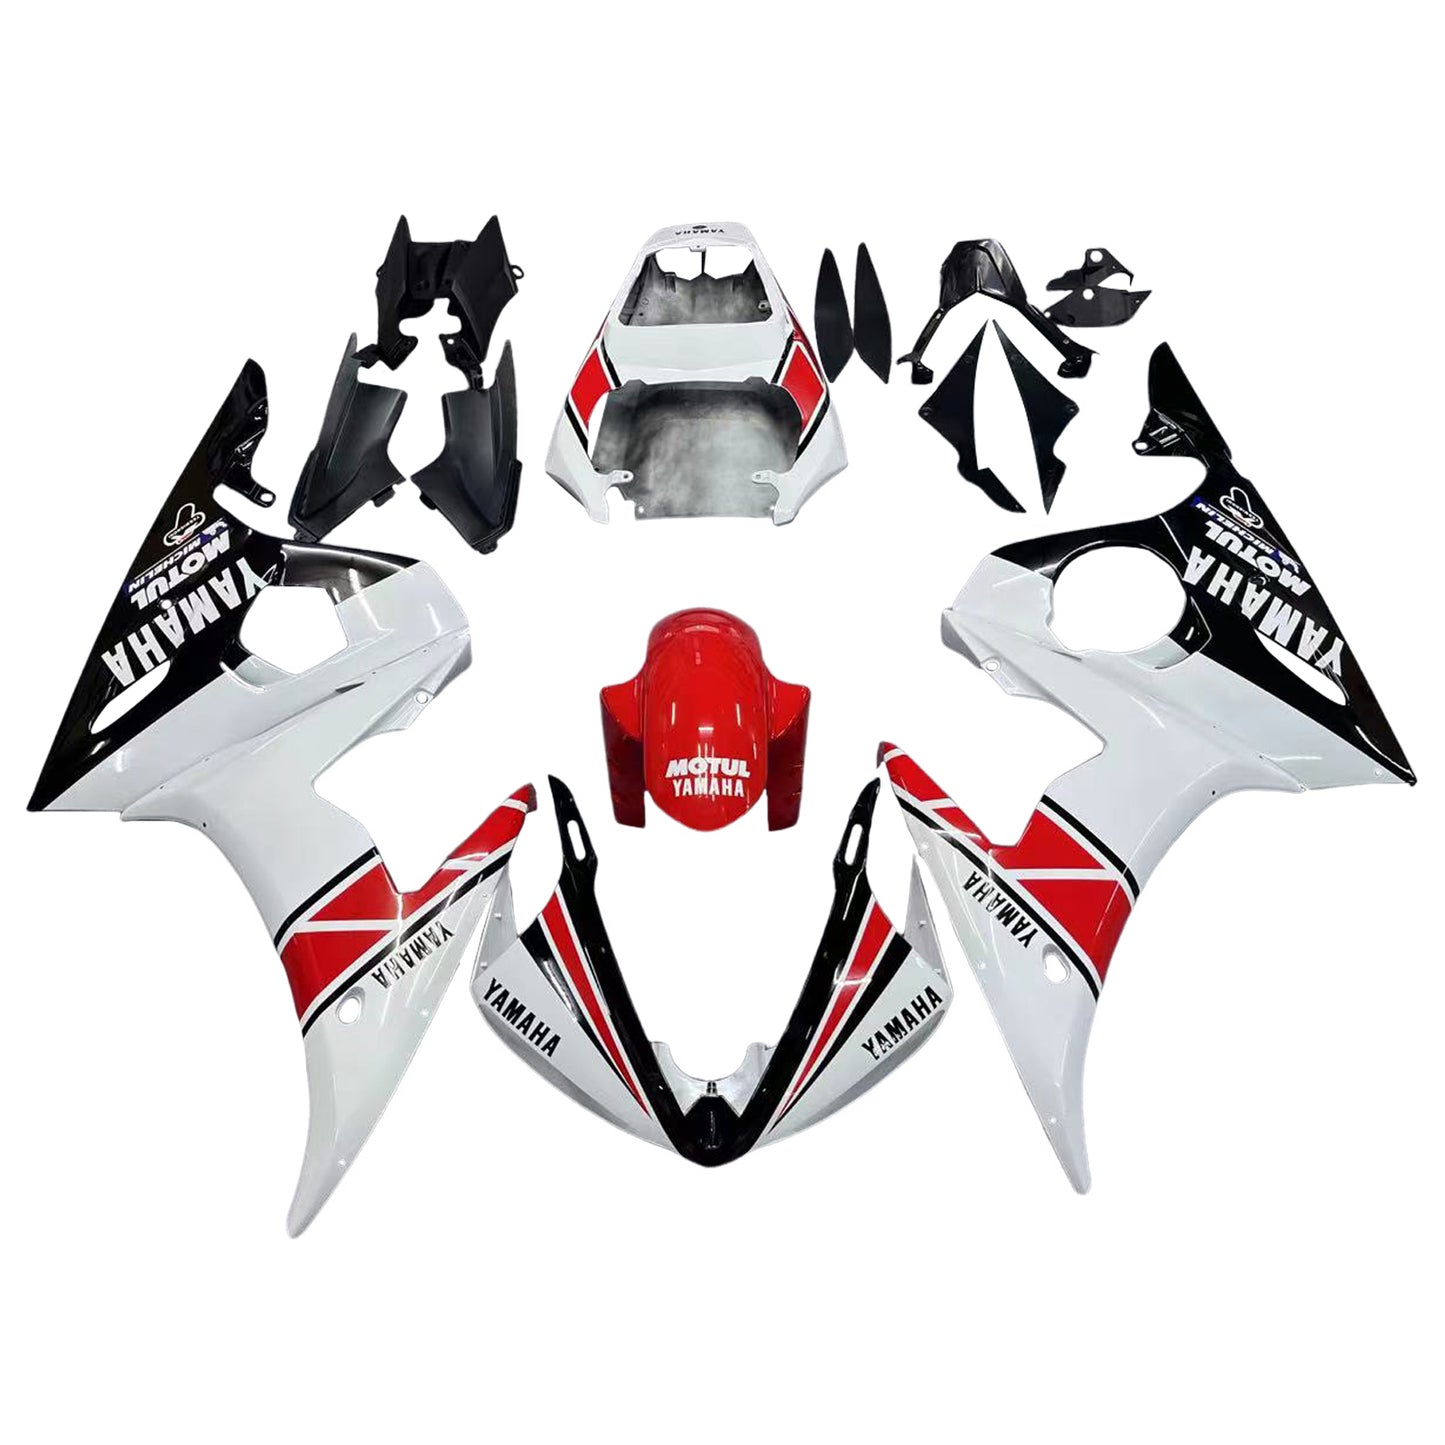 Amotopart Yamaha 2003-2004 YZF 600 R6 & 2006-2009 YZF R6S White Red Fearing Kit